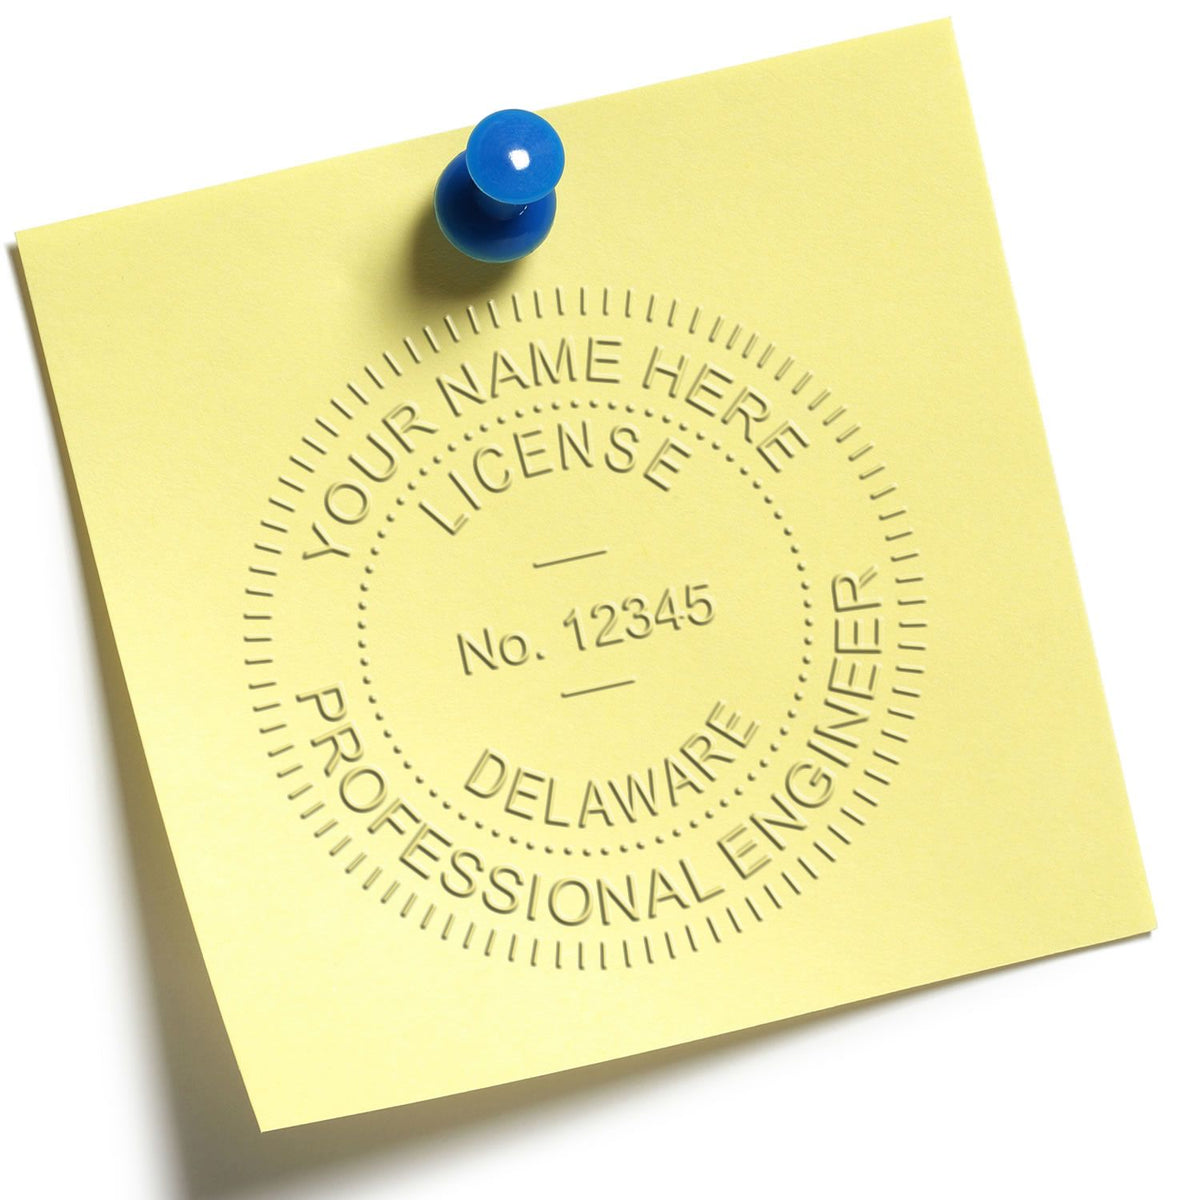 A photograph of the Heavy Duty Cast Iron Delaware Engineer Seal Embosser stamp impression reveals a vivid, professional image of the on paper.